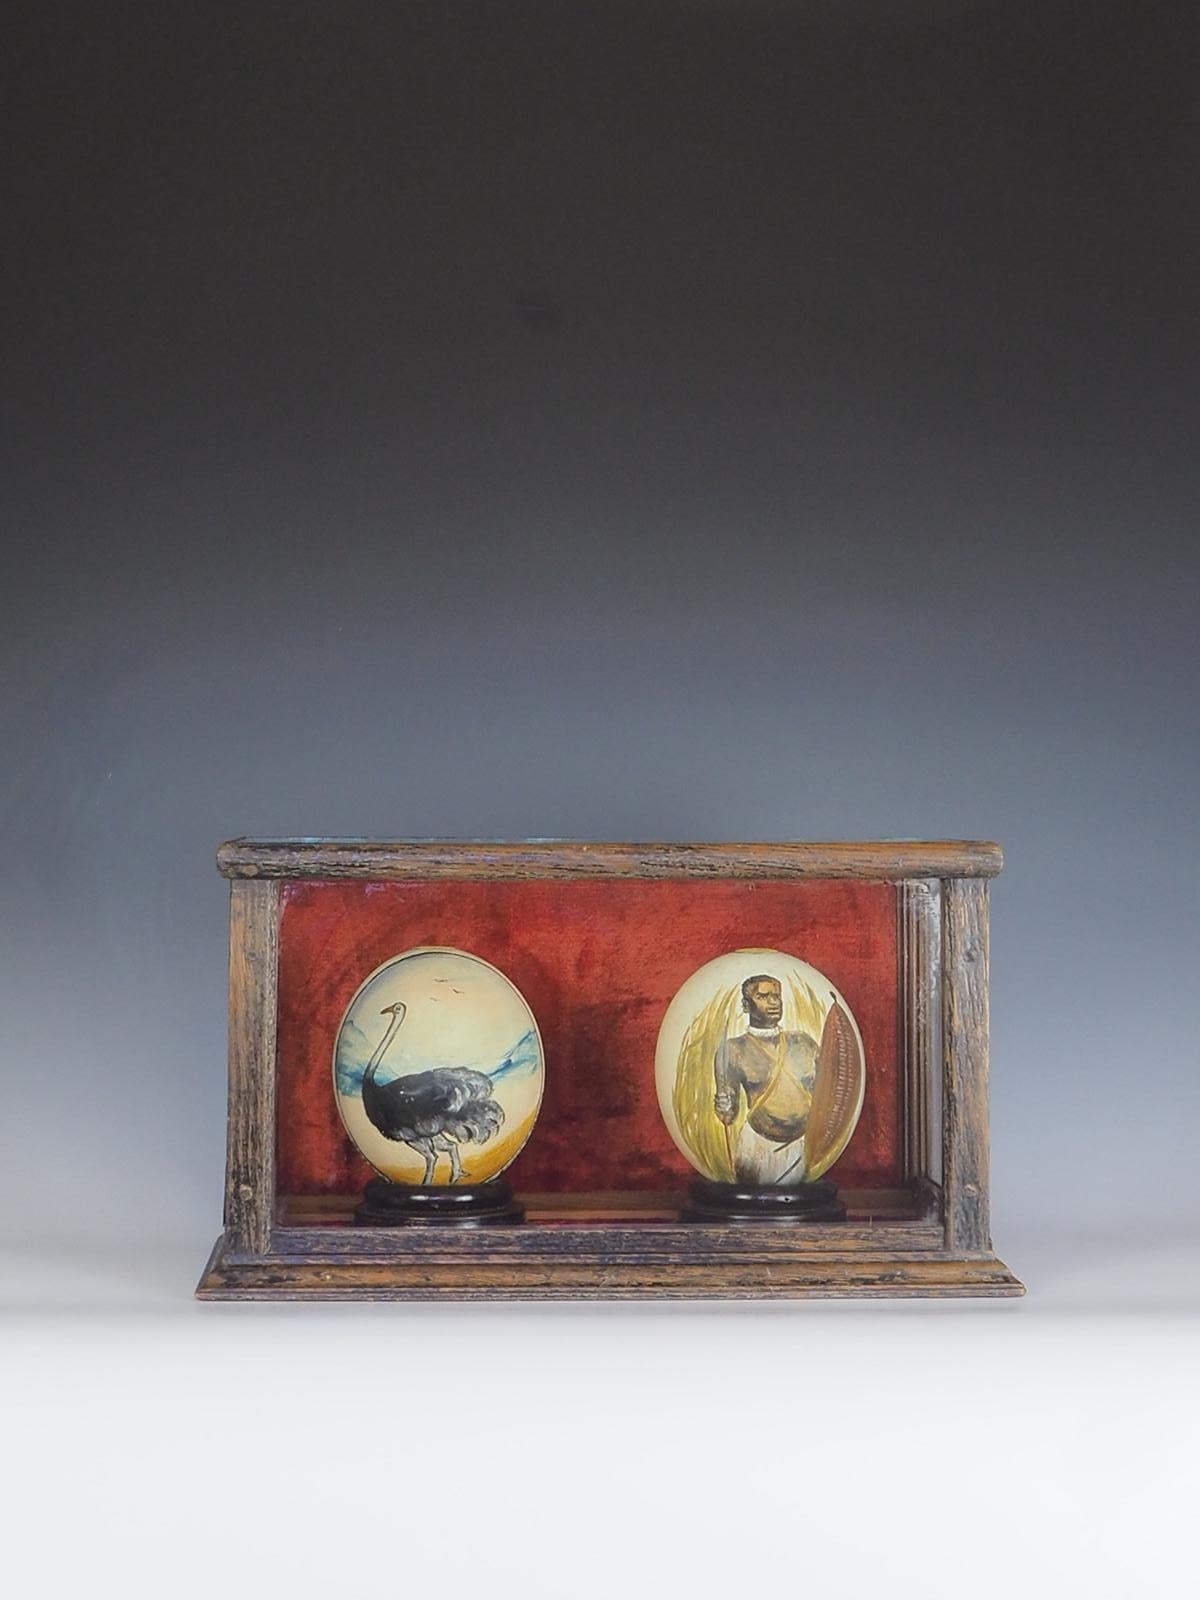 These antique pair of cased South African ostrich eggs is a unique and exquisite addition to any collection. The eggs are hand-painted with intricate designs, showcasing the talent and skill of the artist. The attention to detail is evident in every